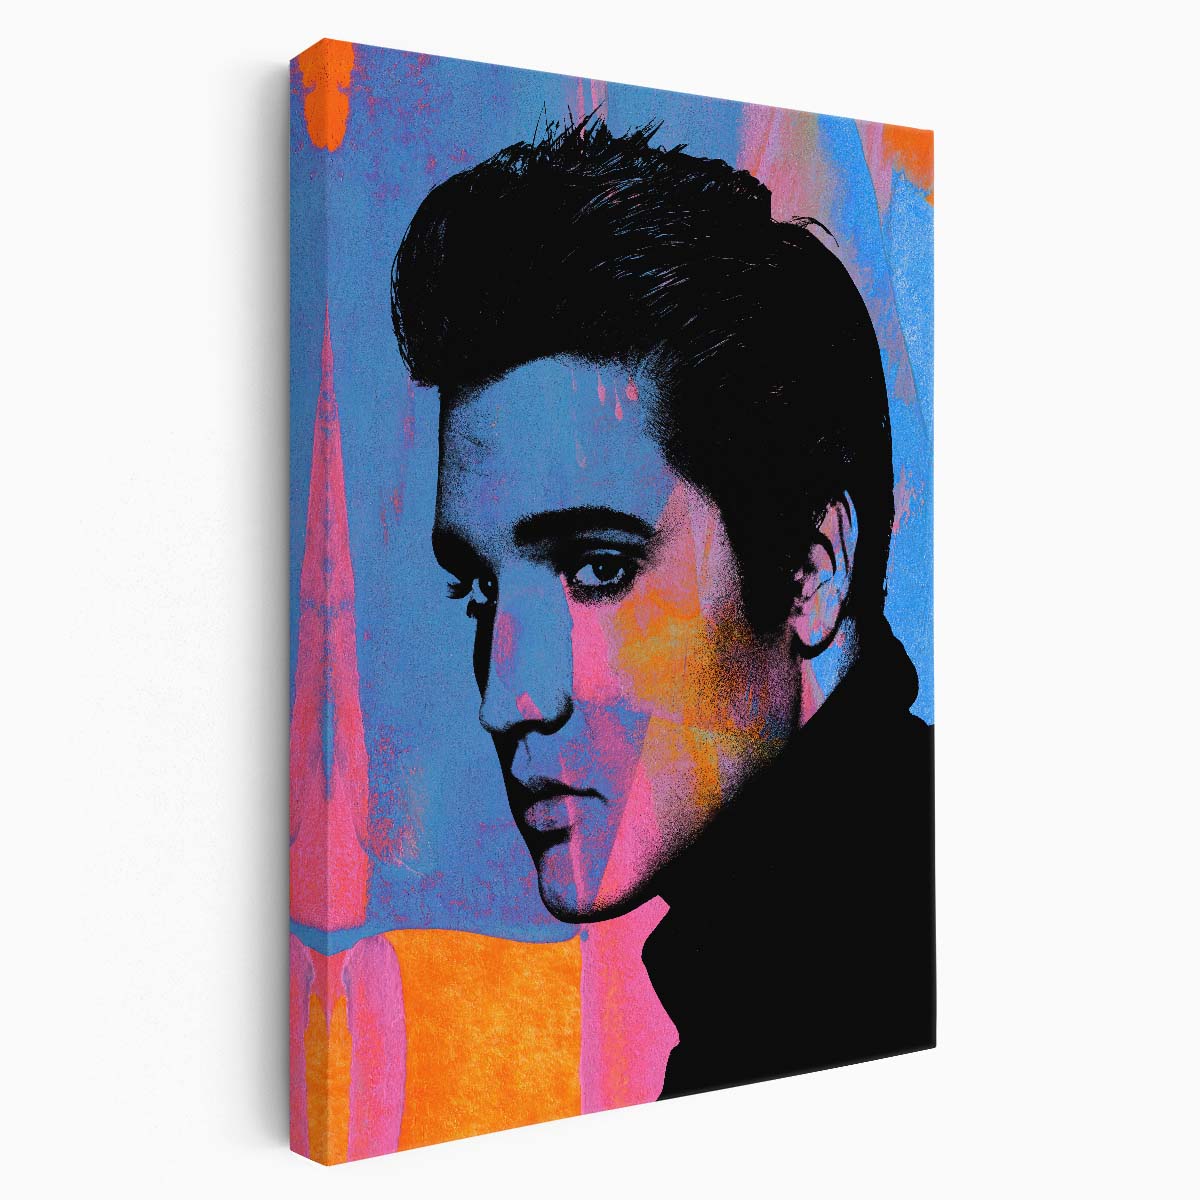 Elvis Presley Bright Colors Wall Art by Luxuriance Designs. Made in USA.